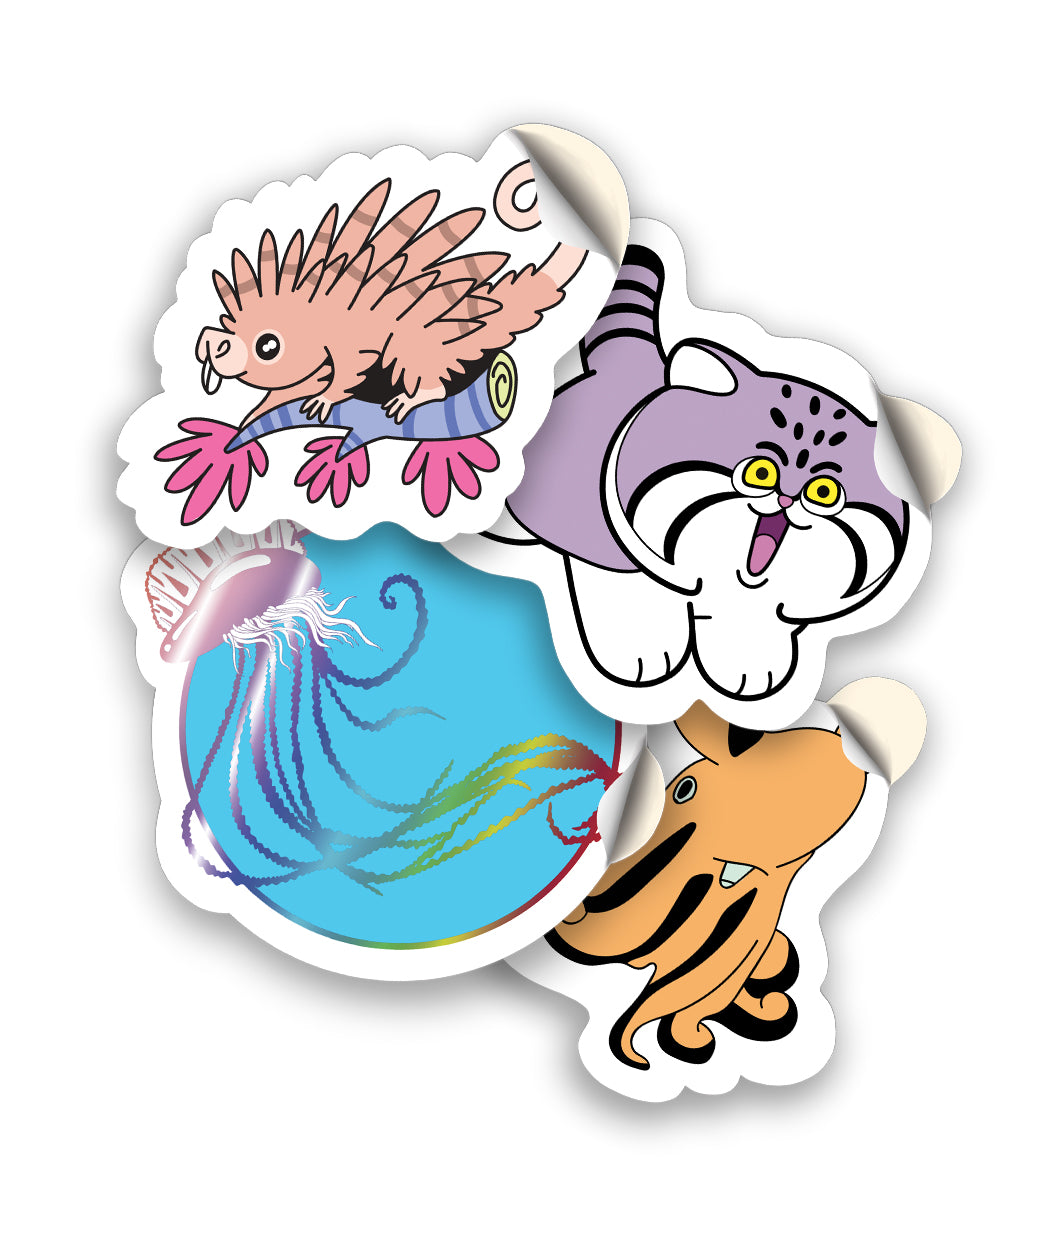 A set of four stickers of different cartoon drawn bizarre beasts - a peach colored porcupine on a branch, a purple and white paras cat, a jellyfish against a blue background, and an orange dumbo octopus - from Bizarre Beasts